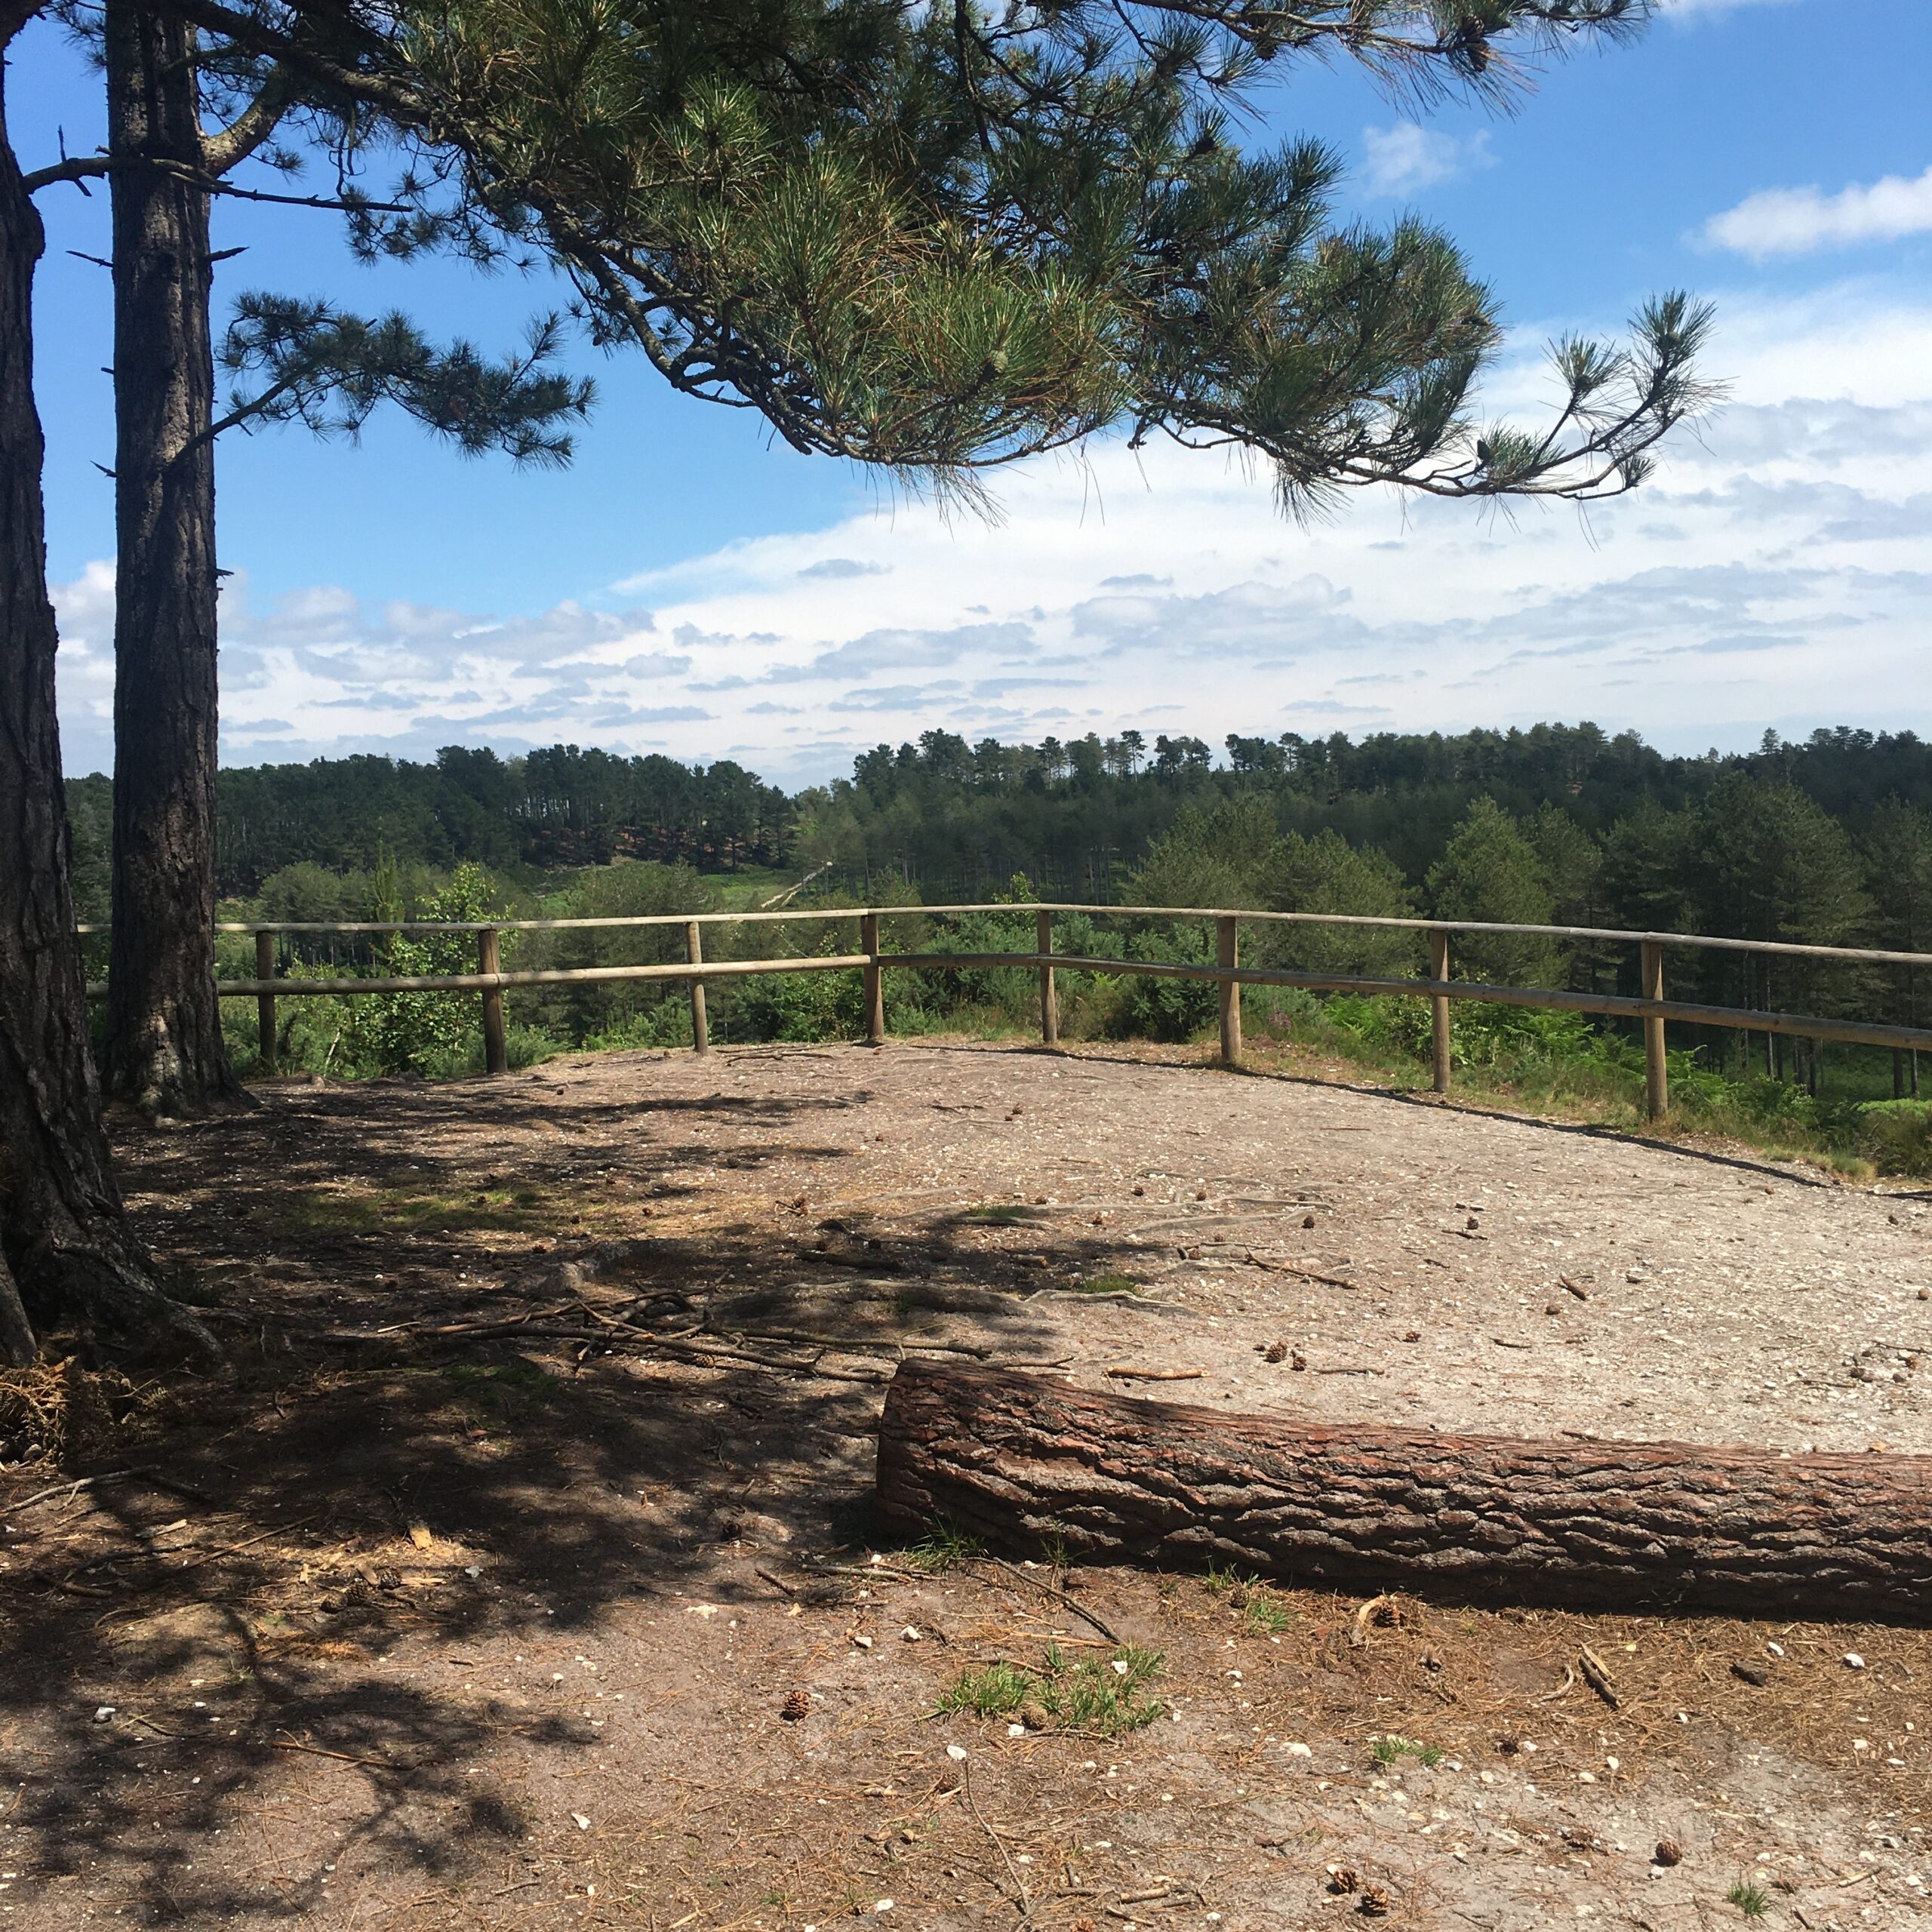 Wareham Forest viewpoint, part of our 3 Walks from our Wareham B&B